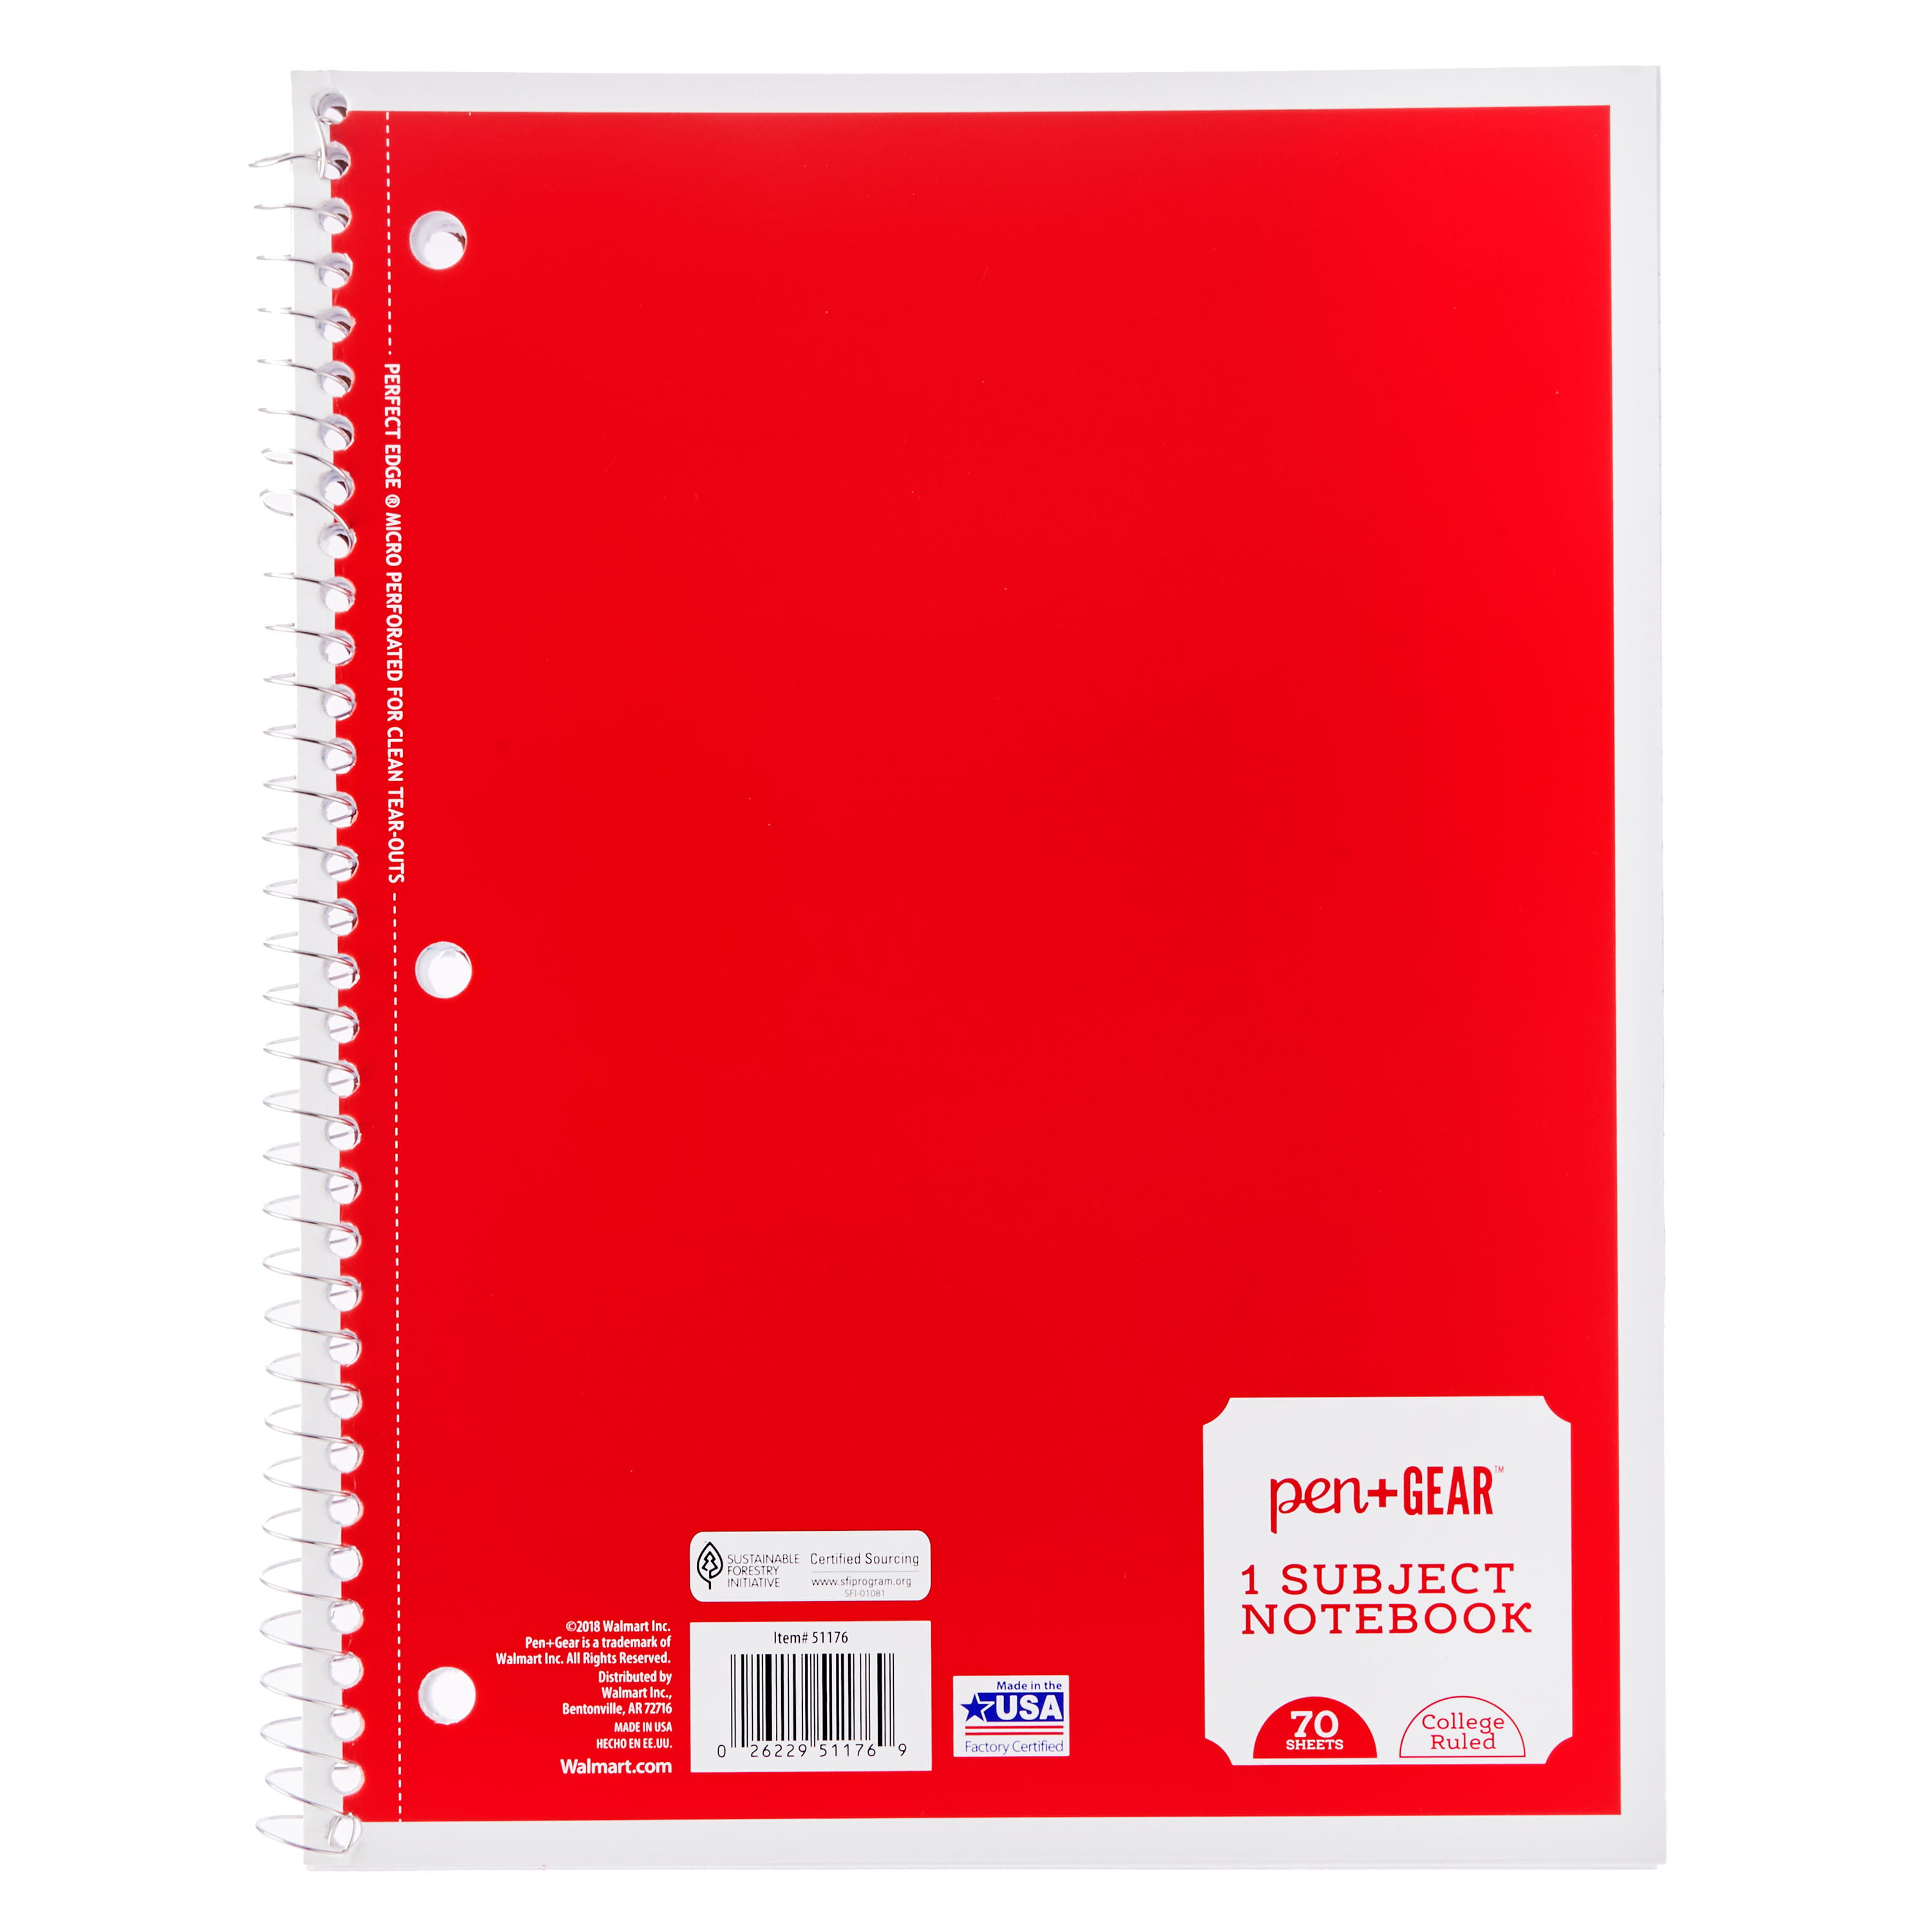 Mead Spiral Notebook612 Pack of 1-Subject College Ruled Spiral Bound Notebooks